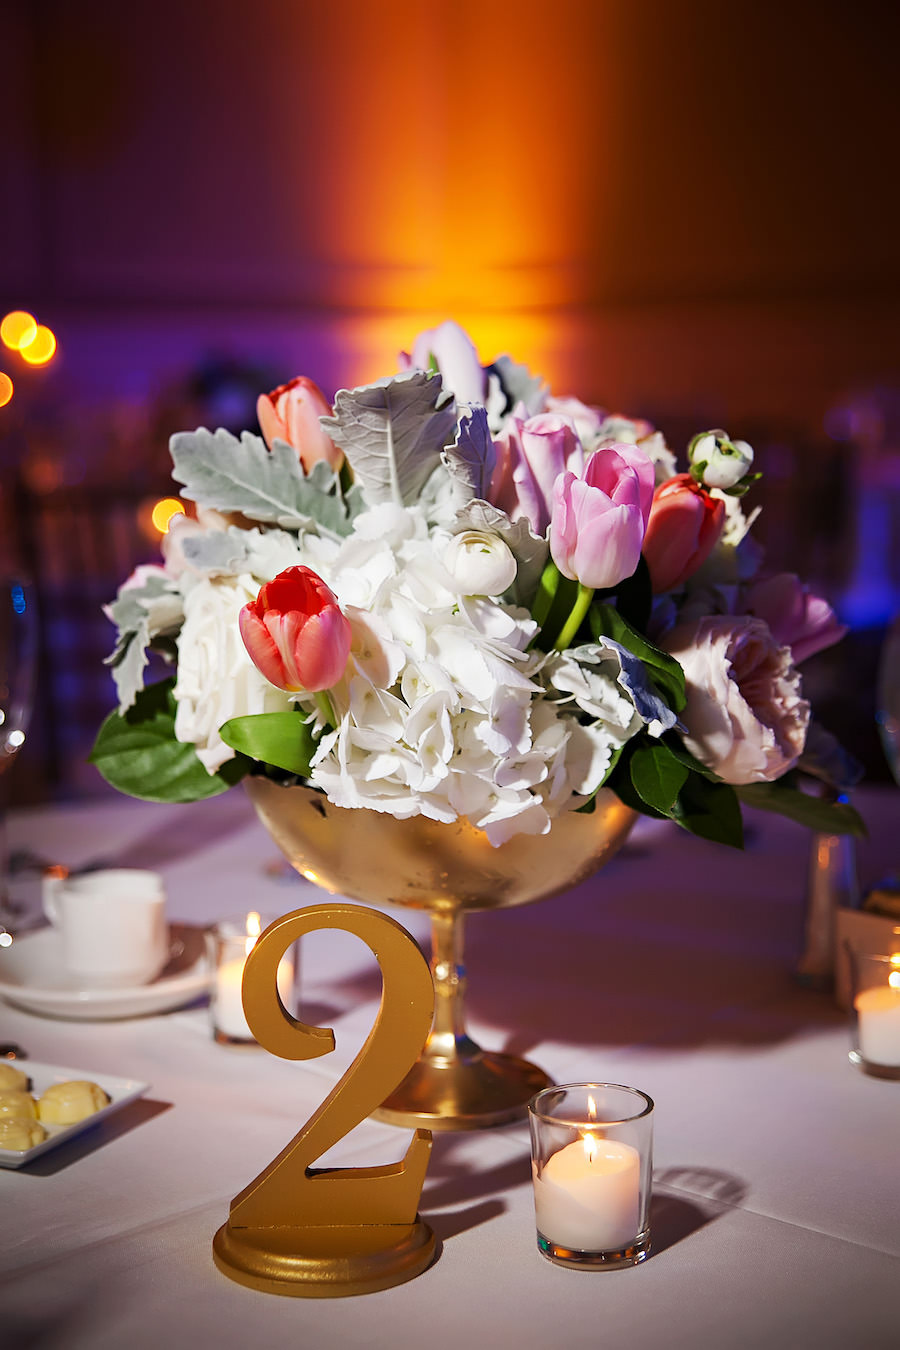 Wedding Reception Table Decor with Gold Table Numbers and Pink, Red, and White Floral Centerpieces with Succulents